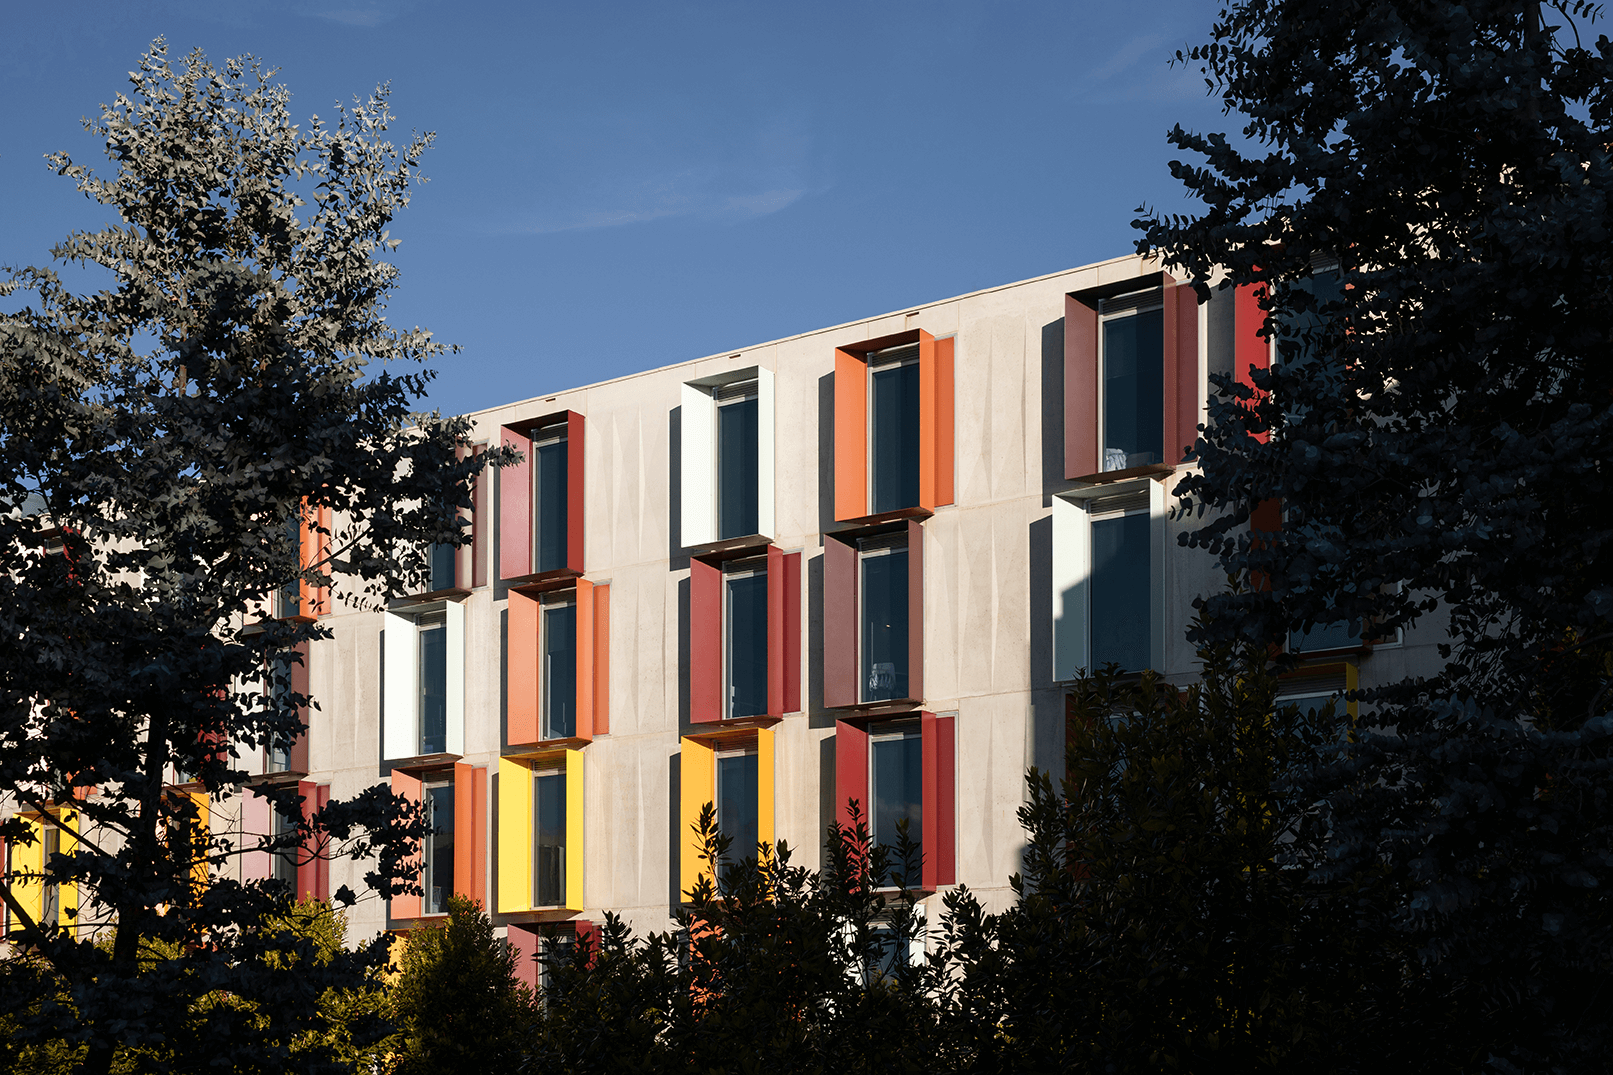 A shot of the side of a student accomodation building with lots of trees around